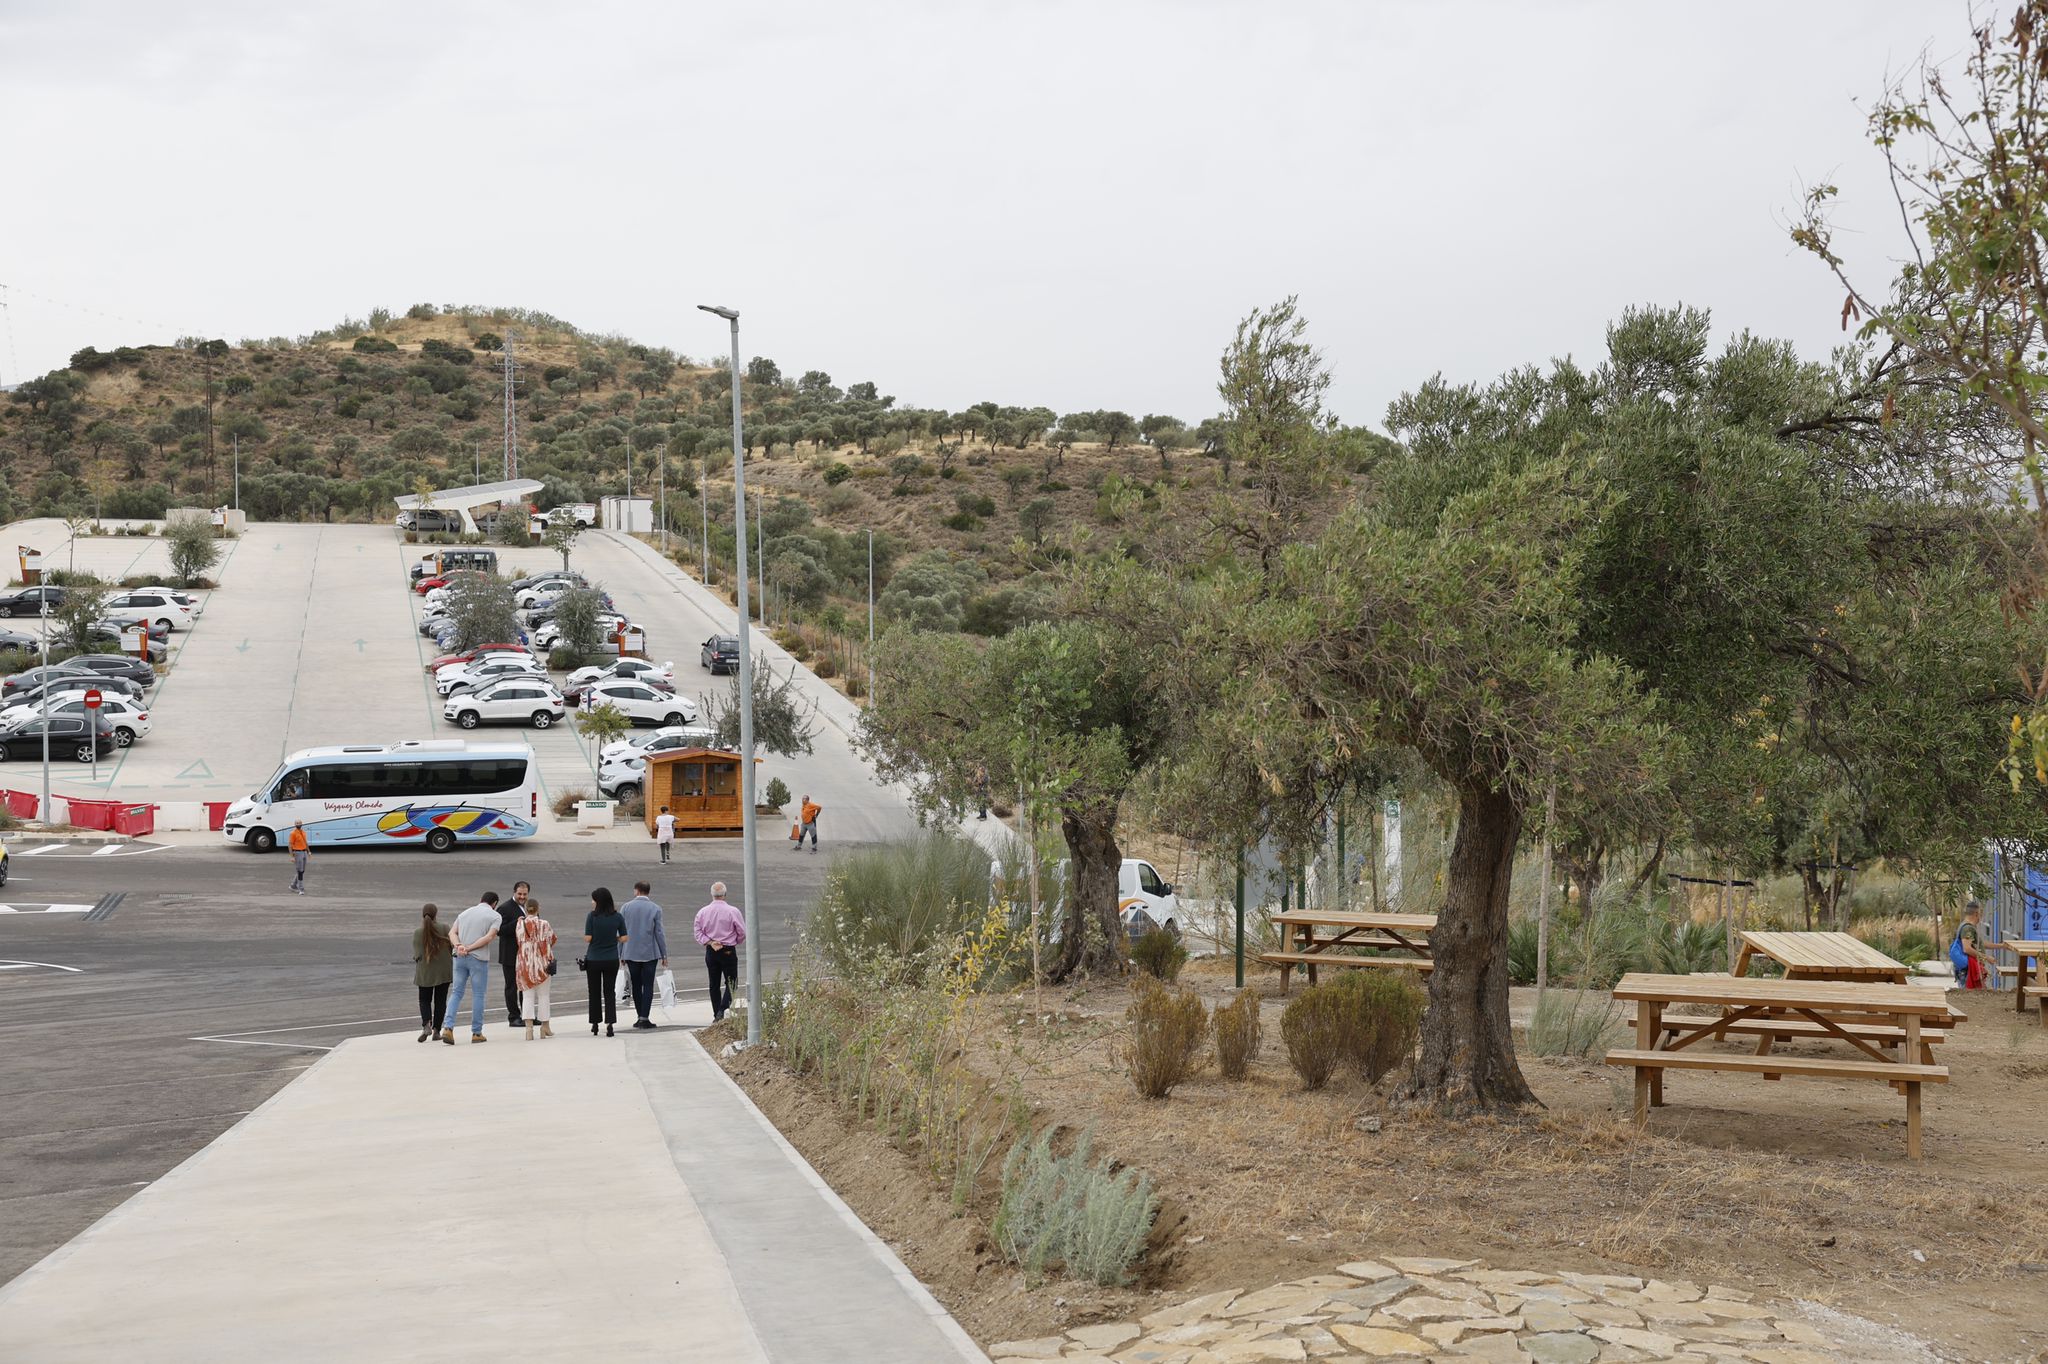 Imagen secundaria 2 - New Caminito del Rey visitor centre opens with 240 parking spaces and a panoramic viewpoint